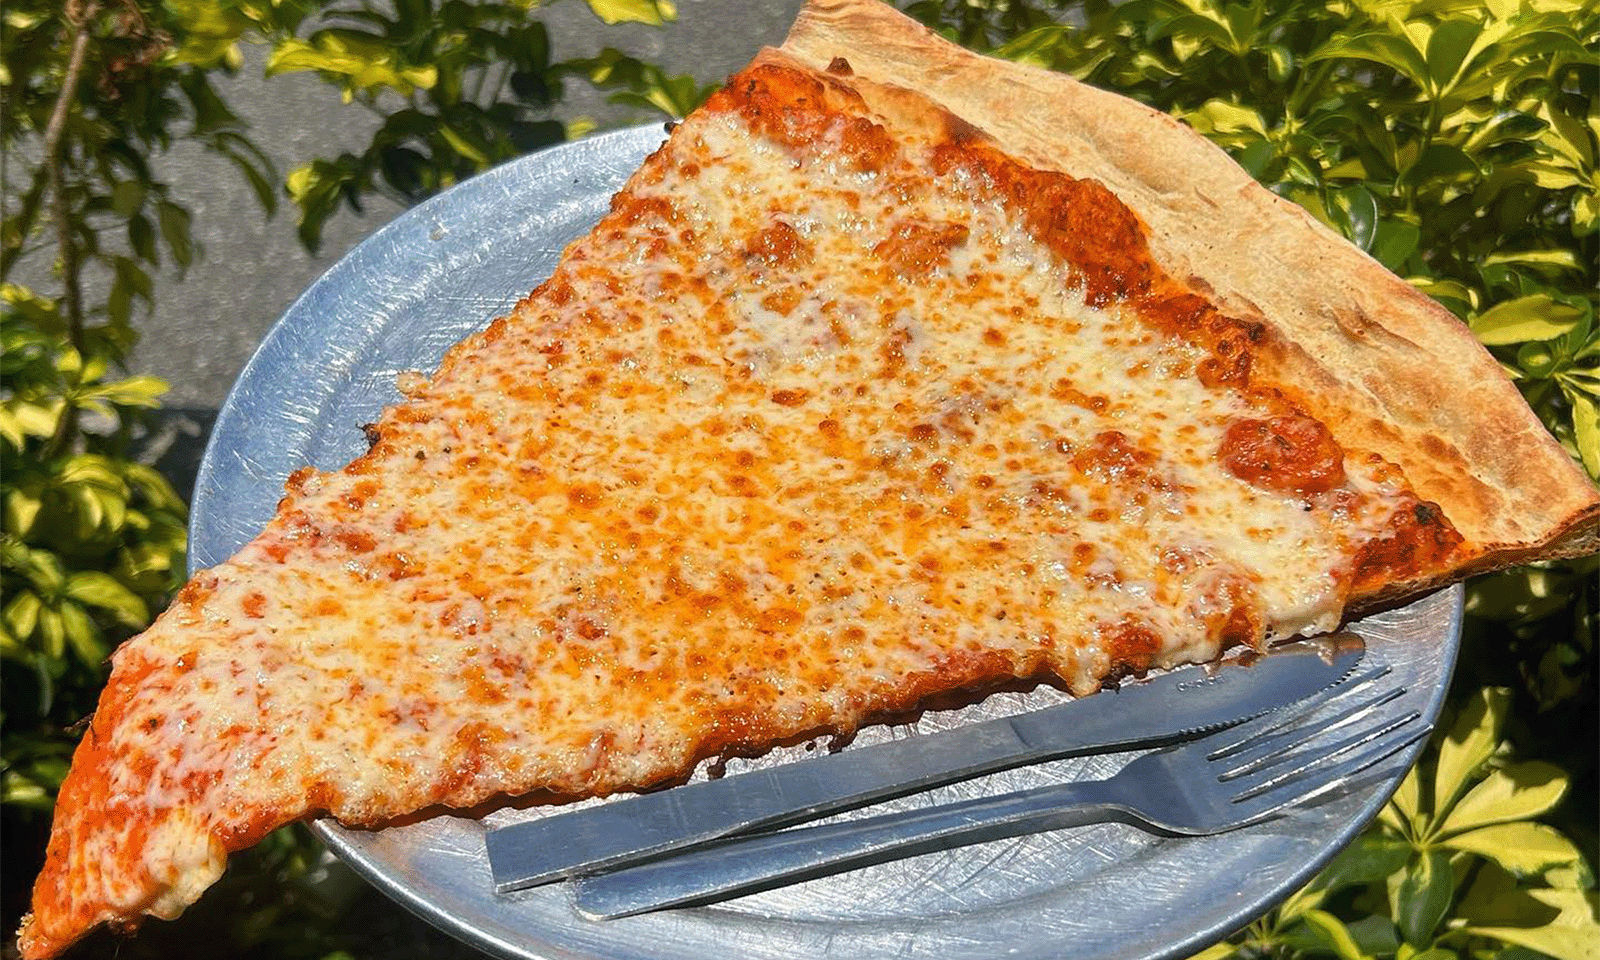 large cheese pizza slice on metal plate